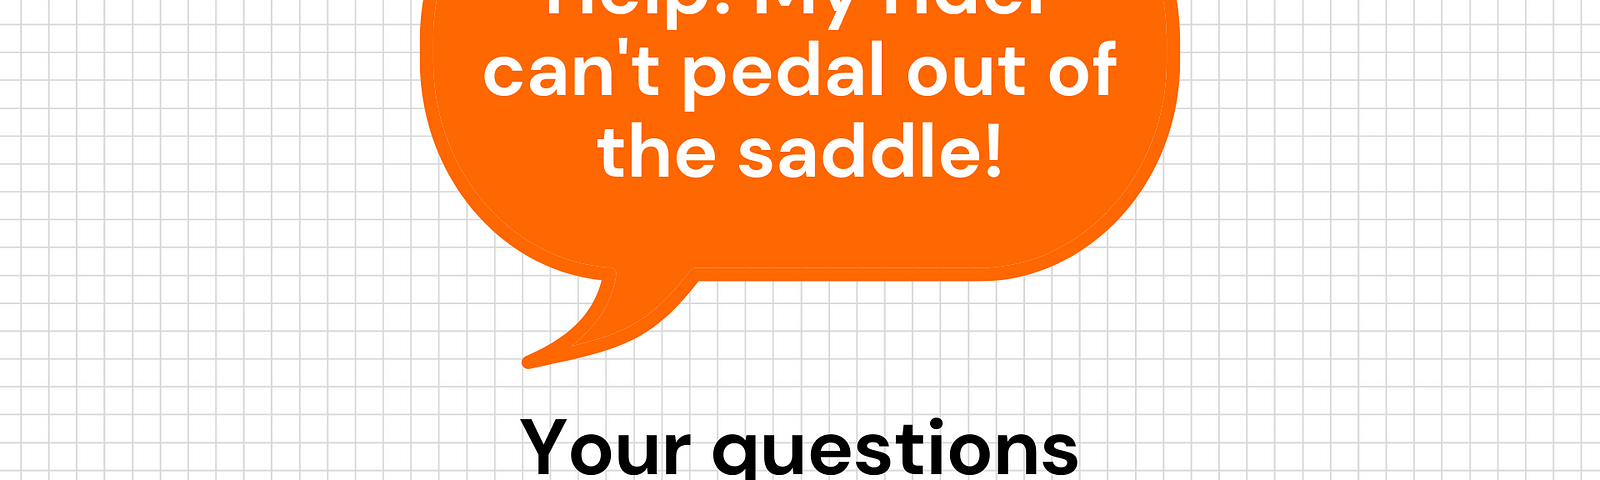 My rider can’t pedal out of the saddle — indoor cycling questions answered.